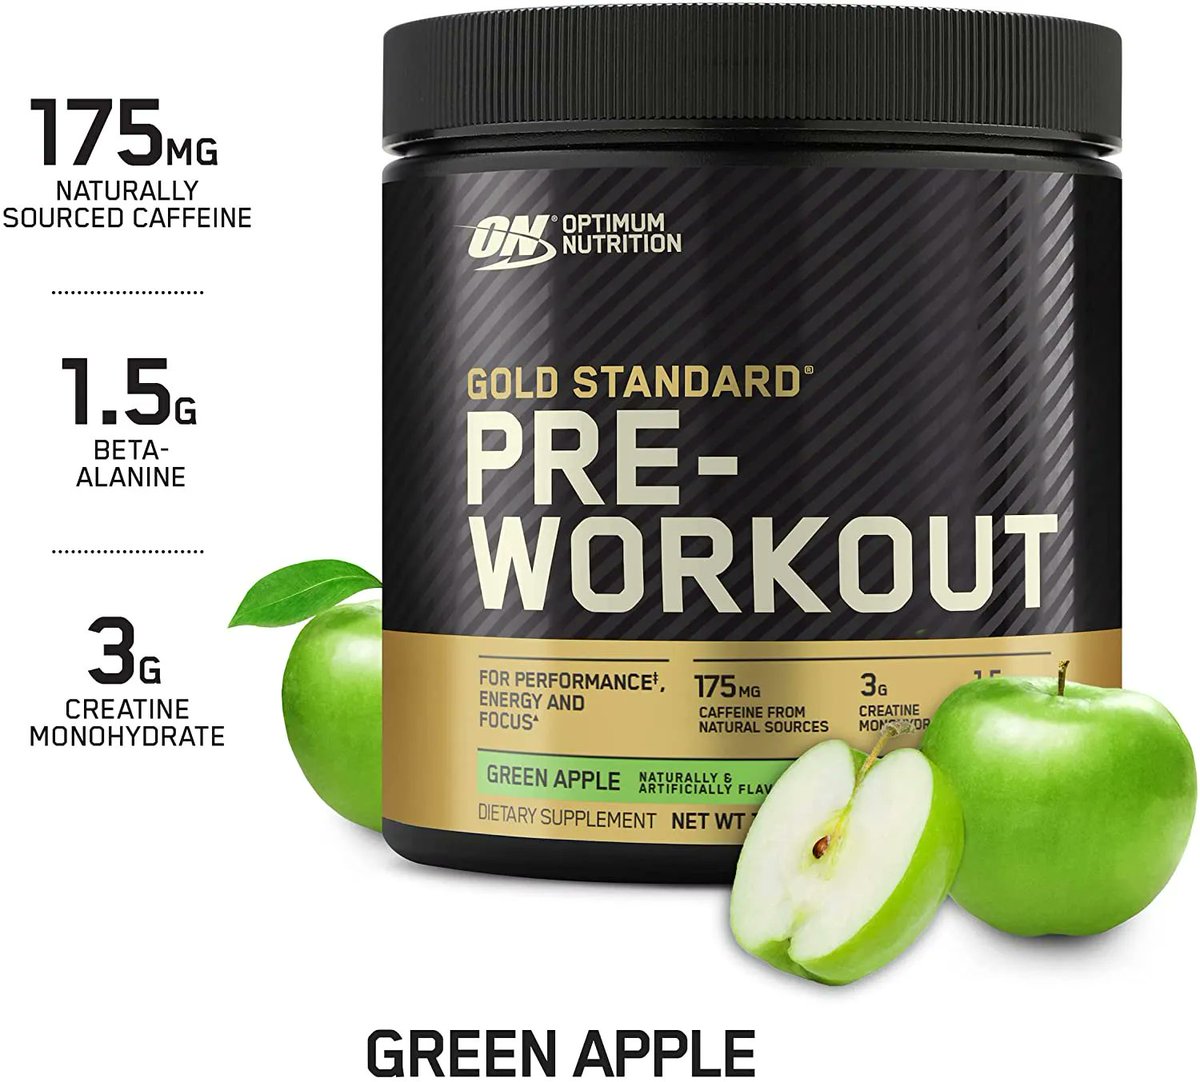 Green Apple Optimum Nutrition Gold Standard Pre Workout- starting at $15!

https://t.co/qtMkNfF83G

MUST Select Sub and Save to get lowest price. Can cancel subscription after item ships! https://t.co/ZiHQNFGQOj